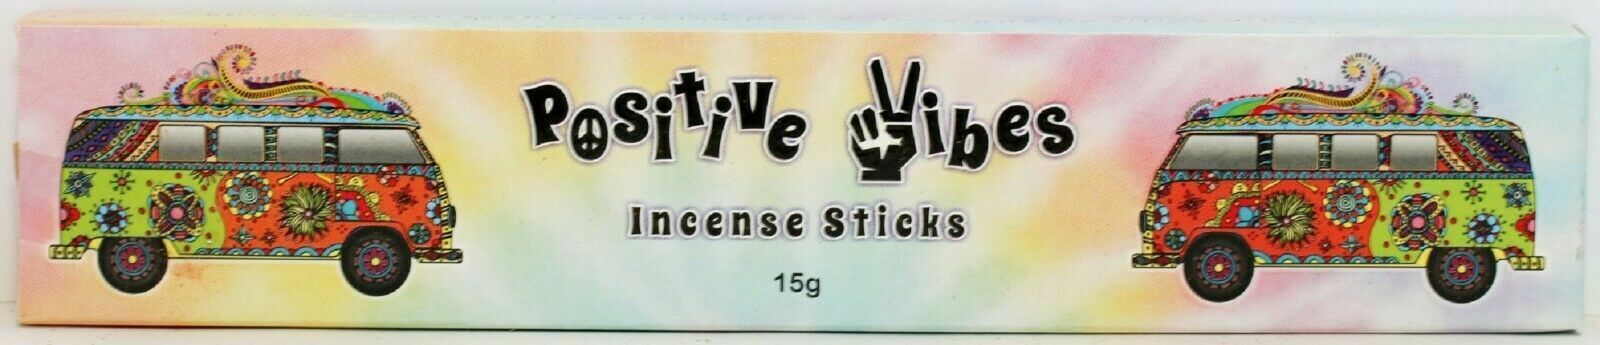 Positive Vibes Incense Sticks Fragrant Sticks Chillout & Feel Good-15g Free Gift